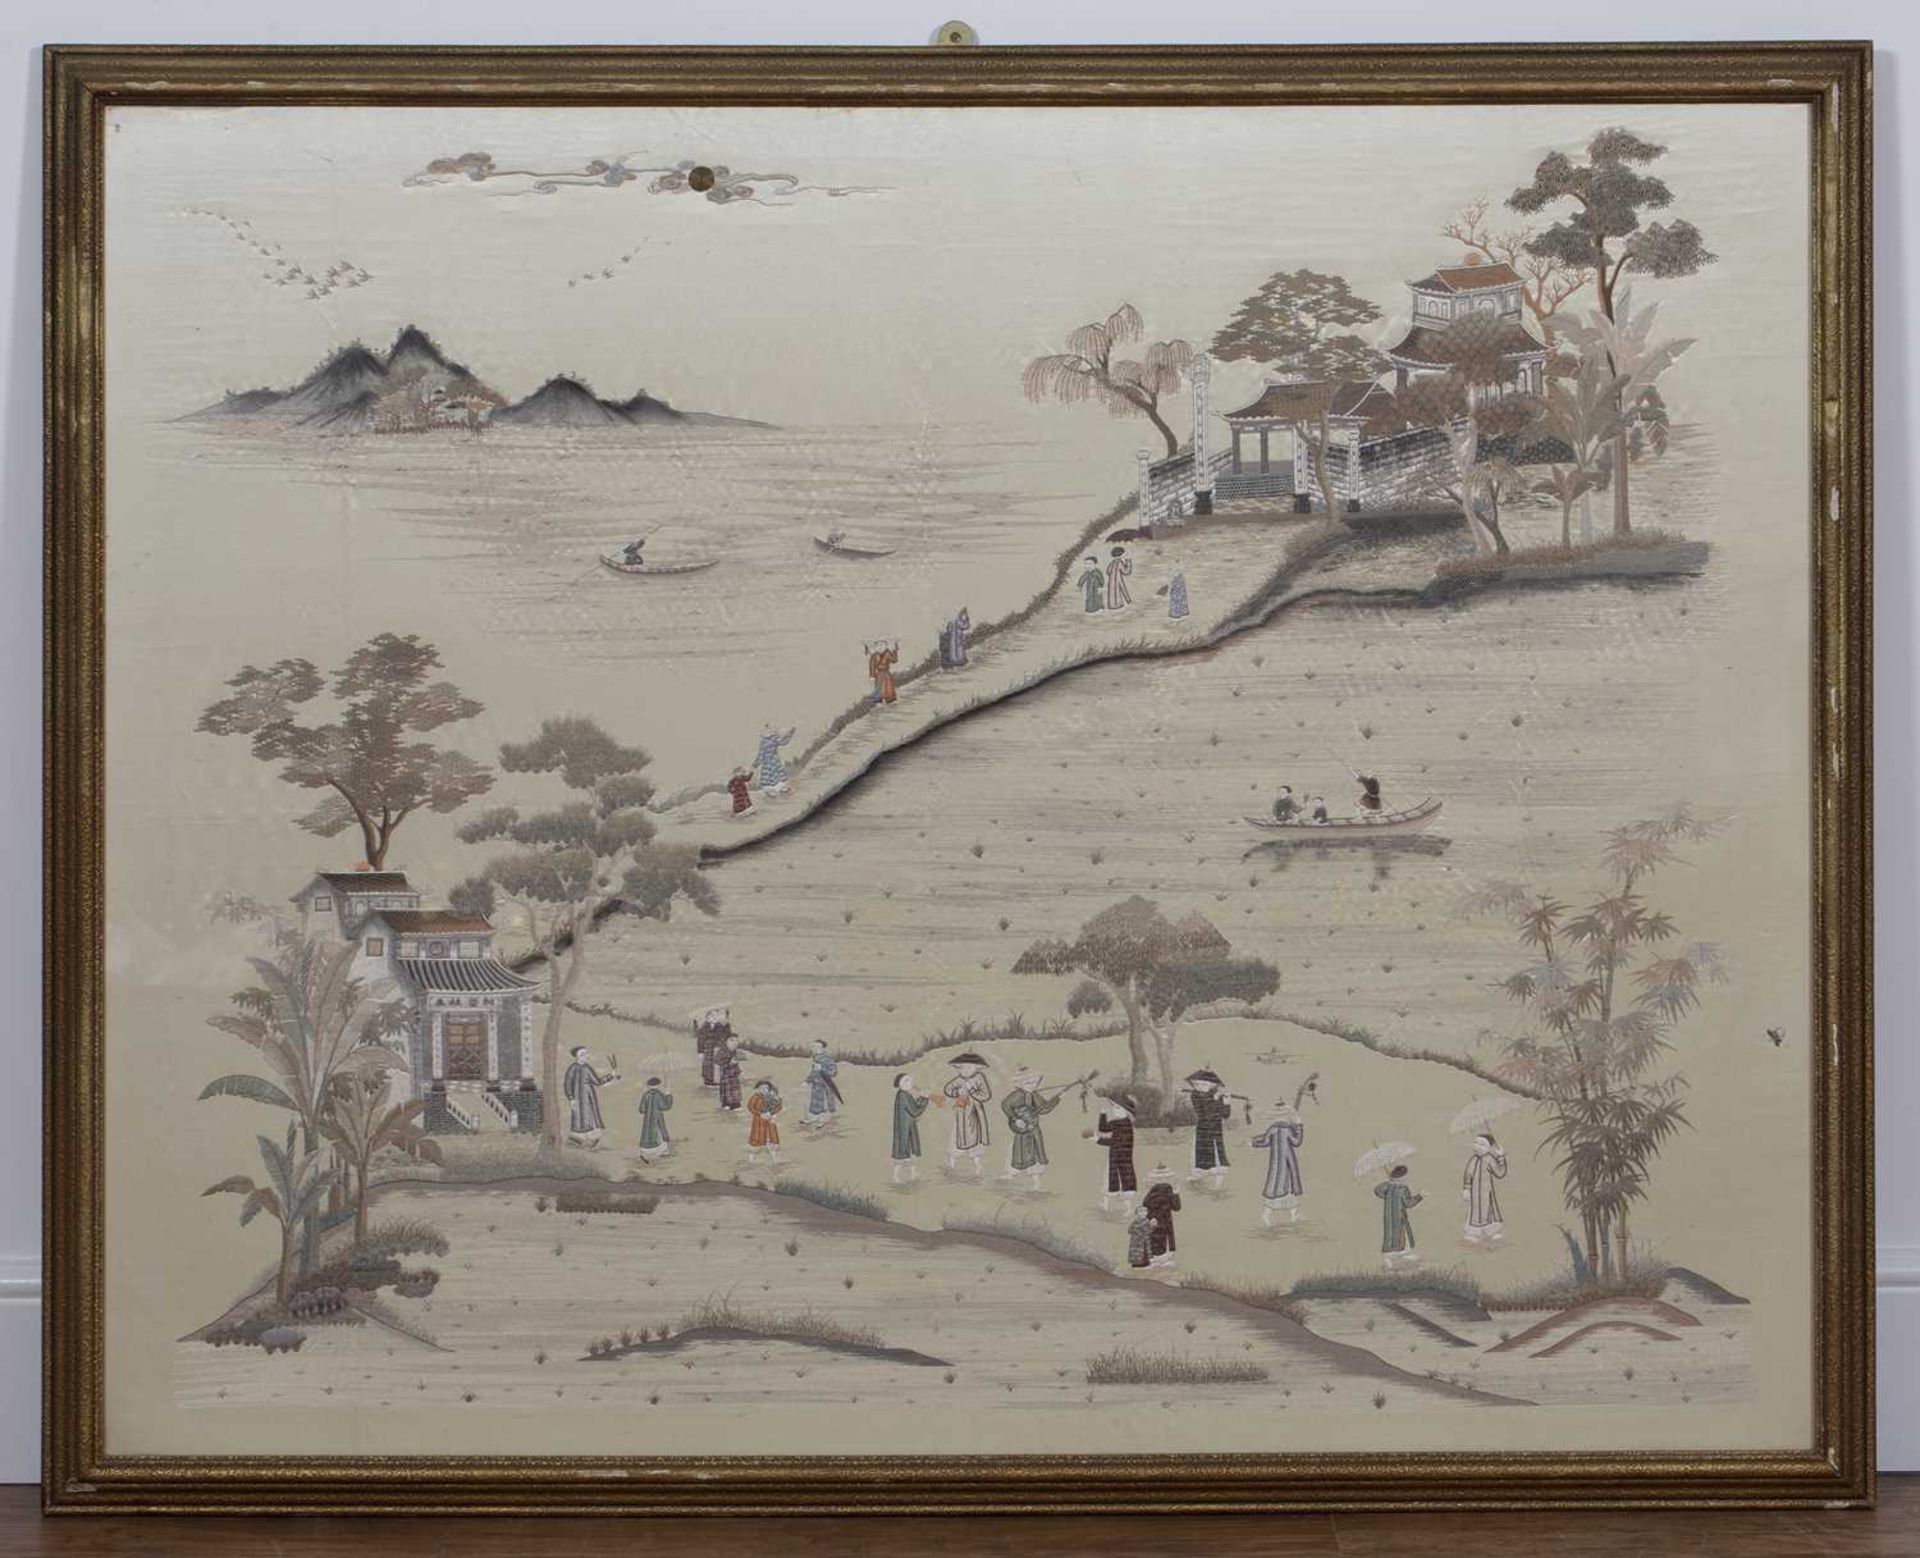 Large embroidered silk panel Chinese, early 20th Century, depicting an extensive lake landscape - Image 2 of 3